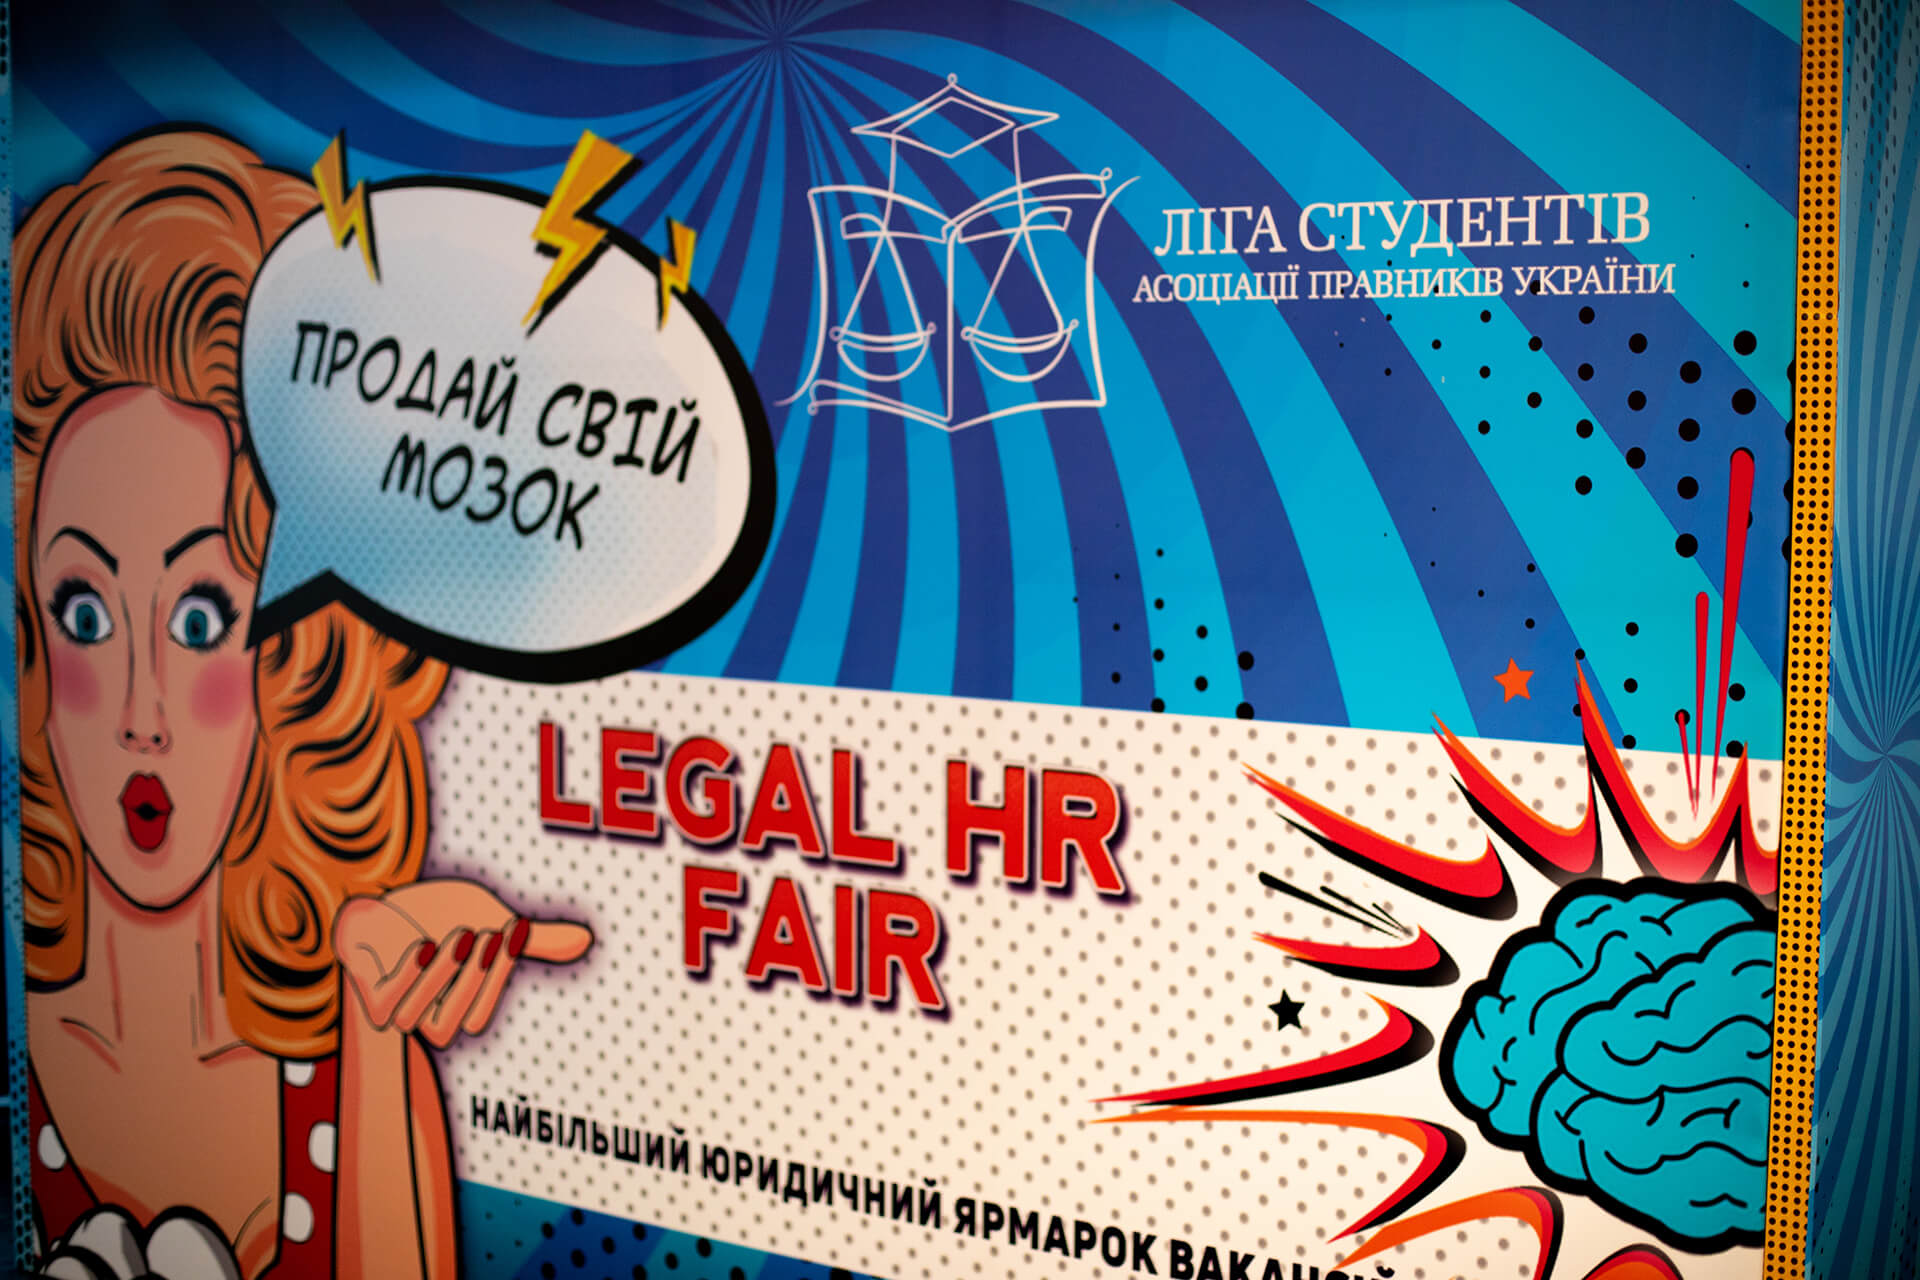 <span class="equity">EQUITY</span> was an Exponent at Legal HR Fair